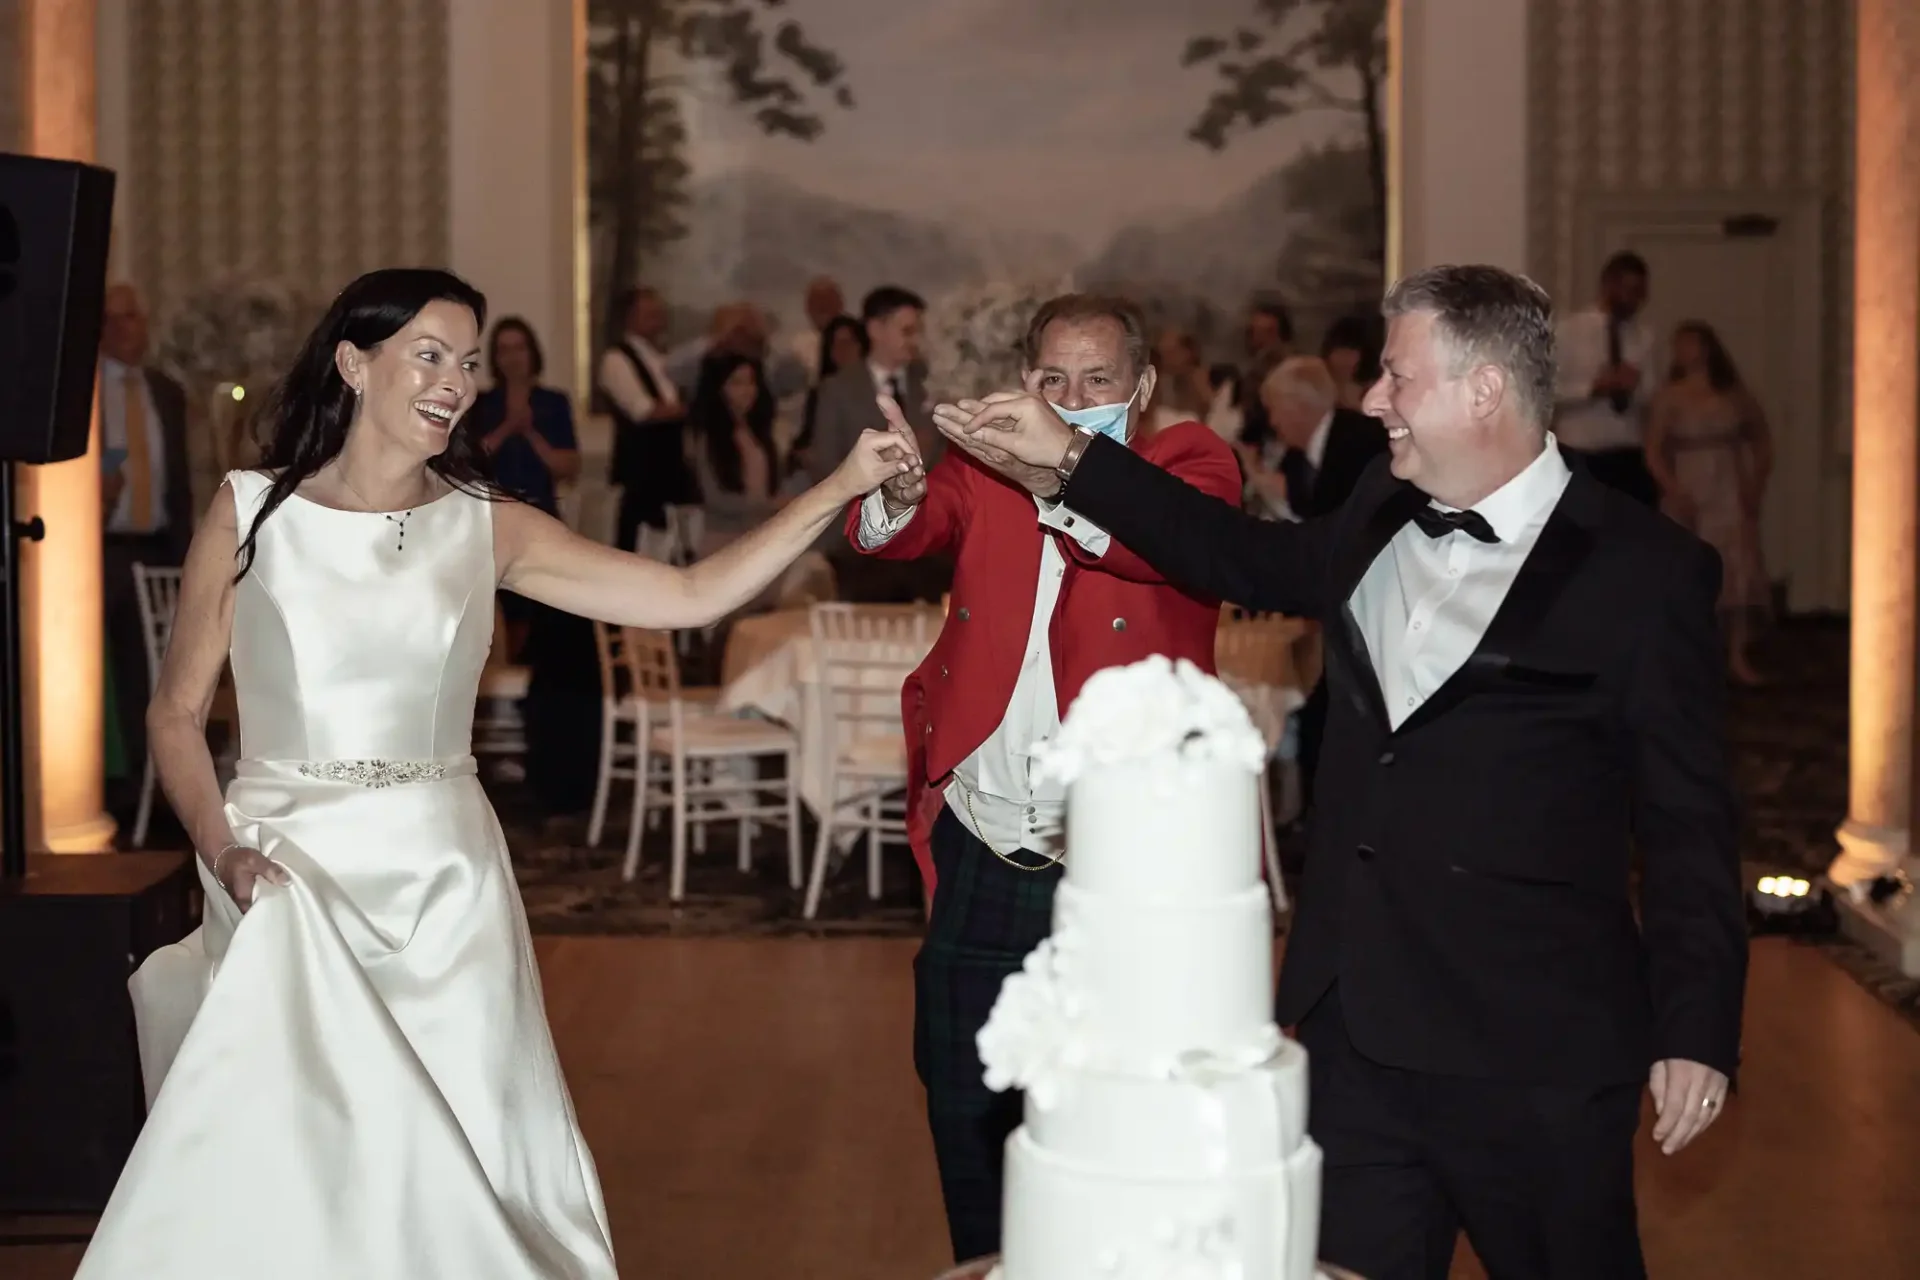 A bride in a white gown fist-bumping an older man in a red jacket, while a man in a black tuxedo smiles beside them at a wedding reception.